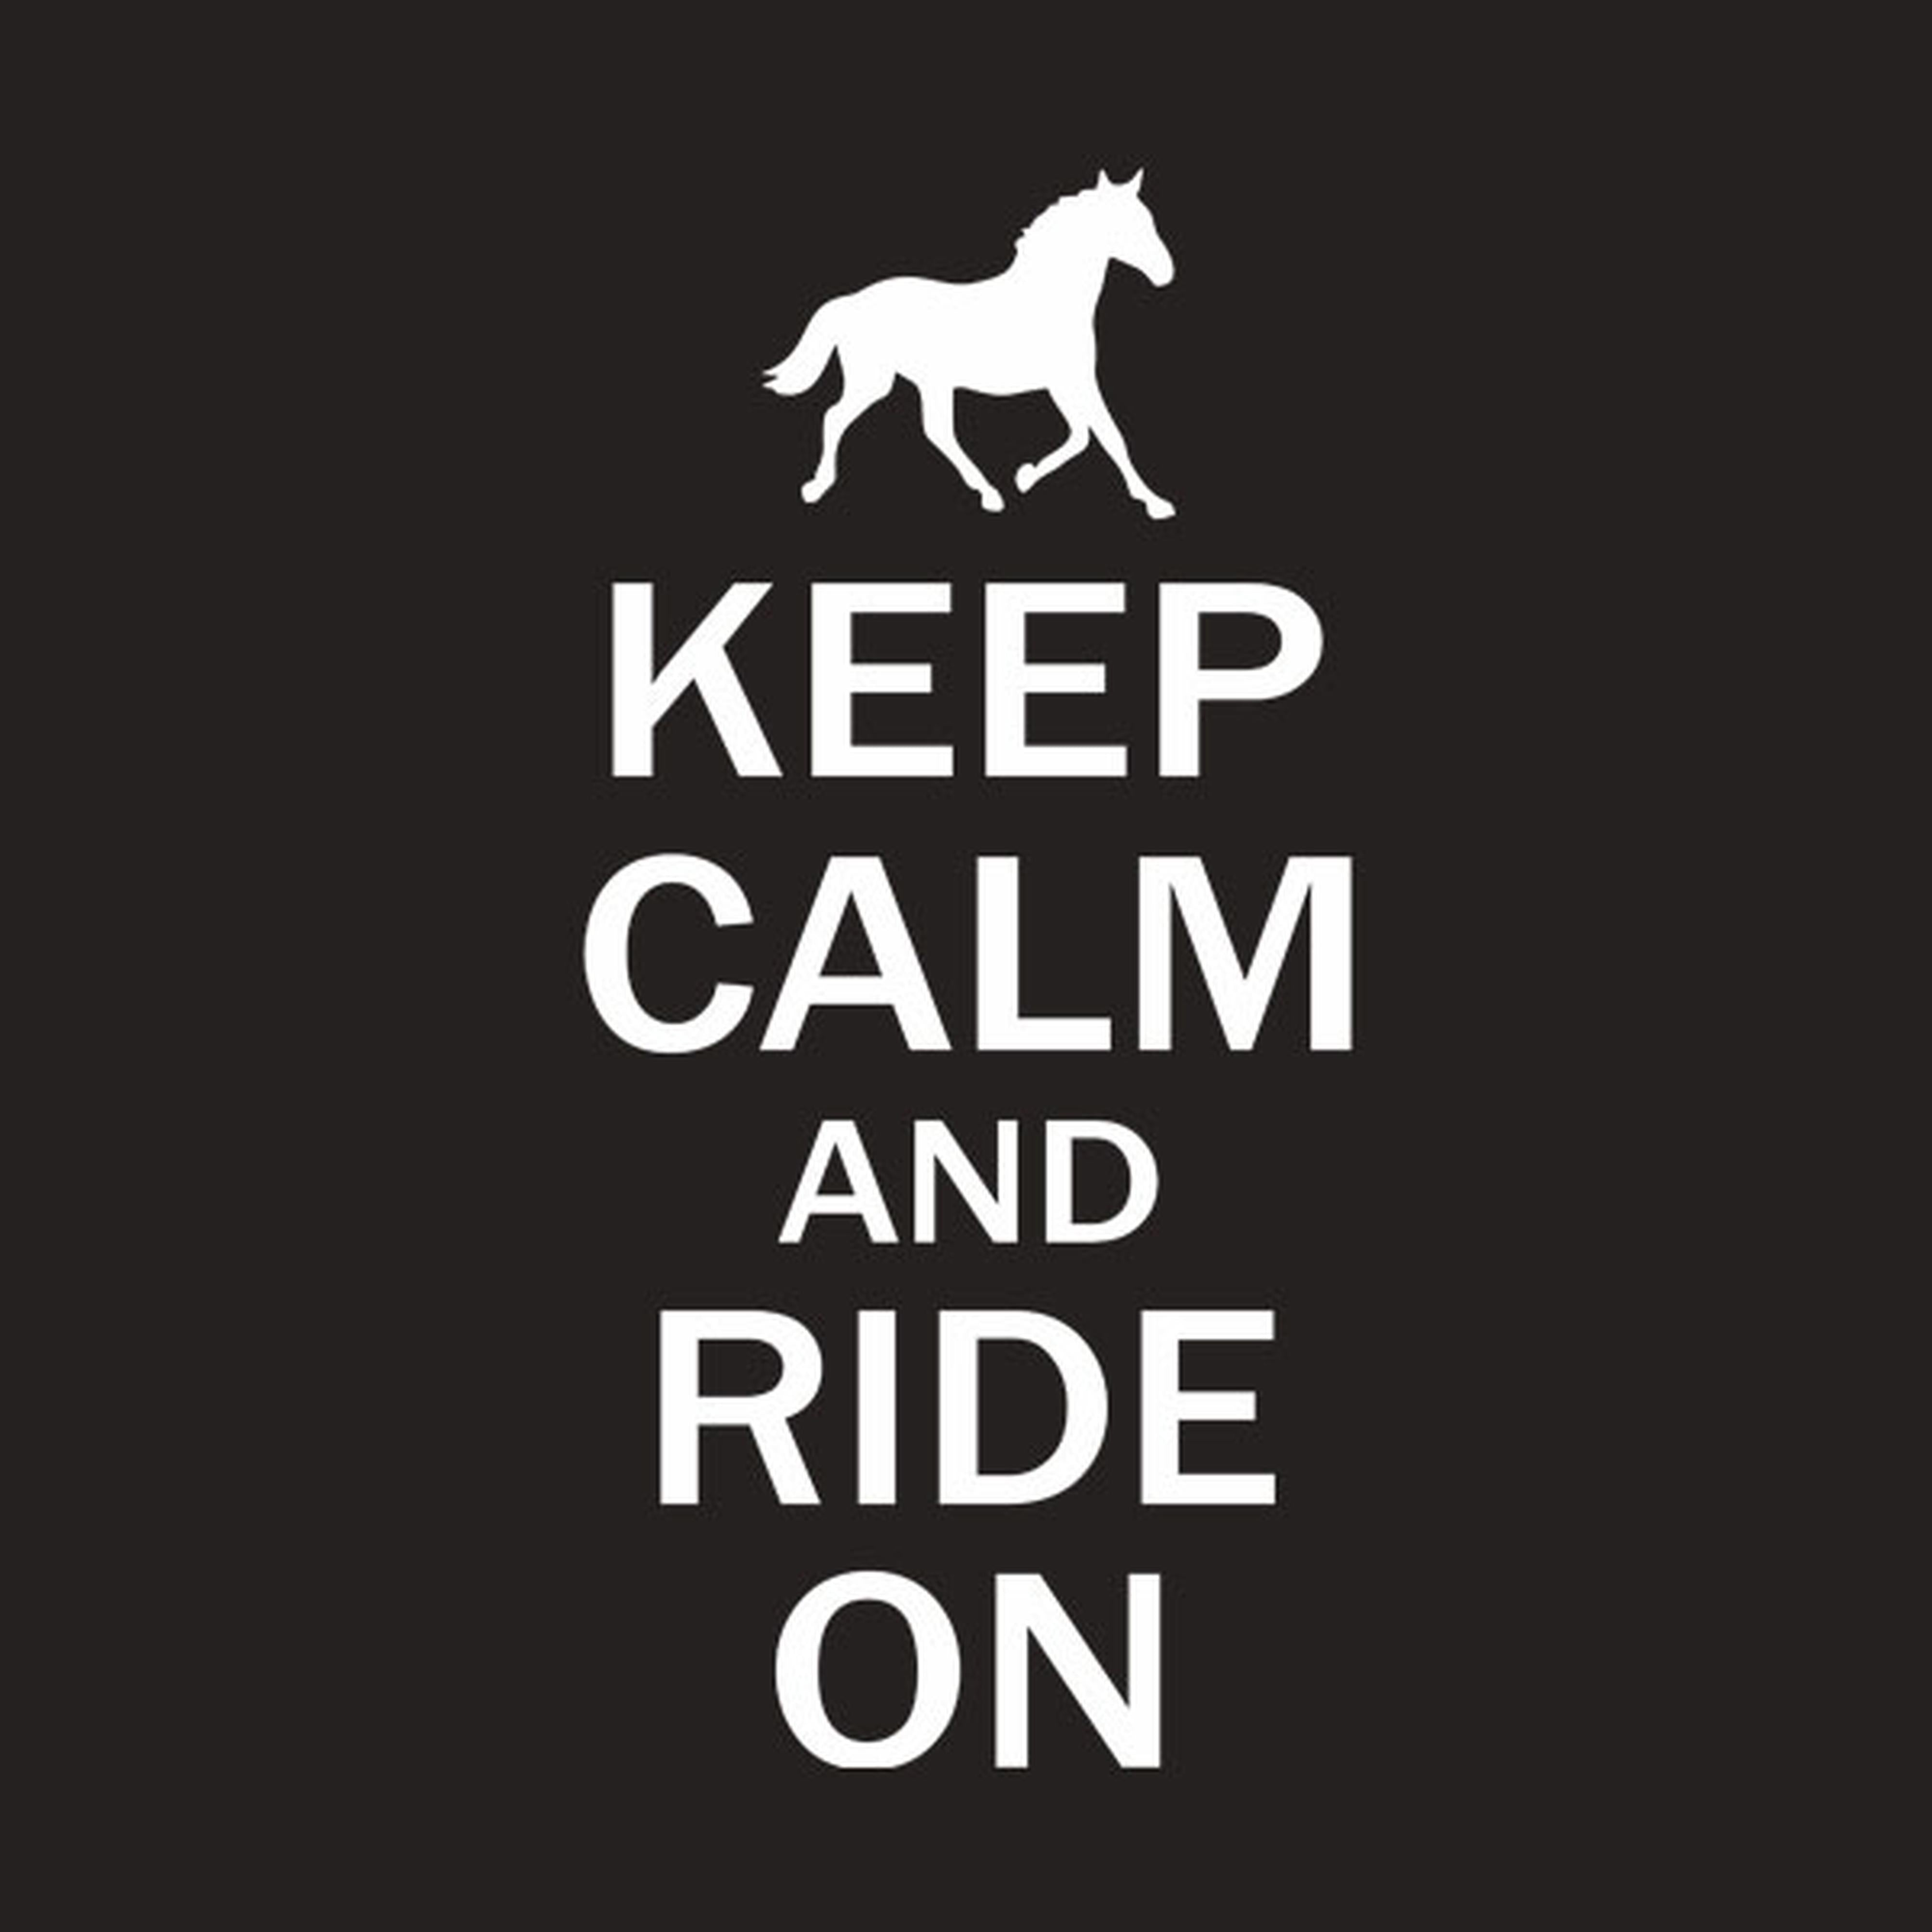 Keep calm and ride on - T-shirt